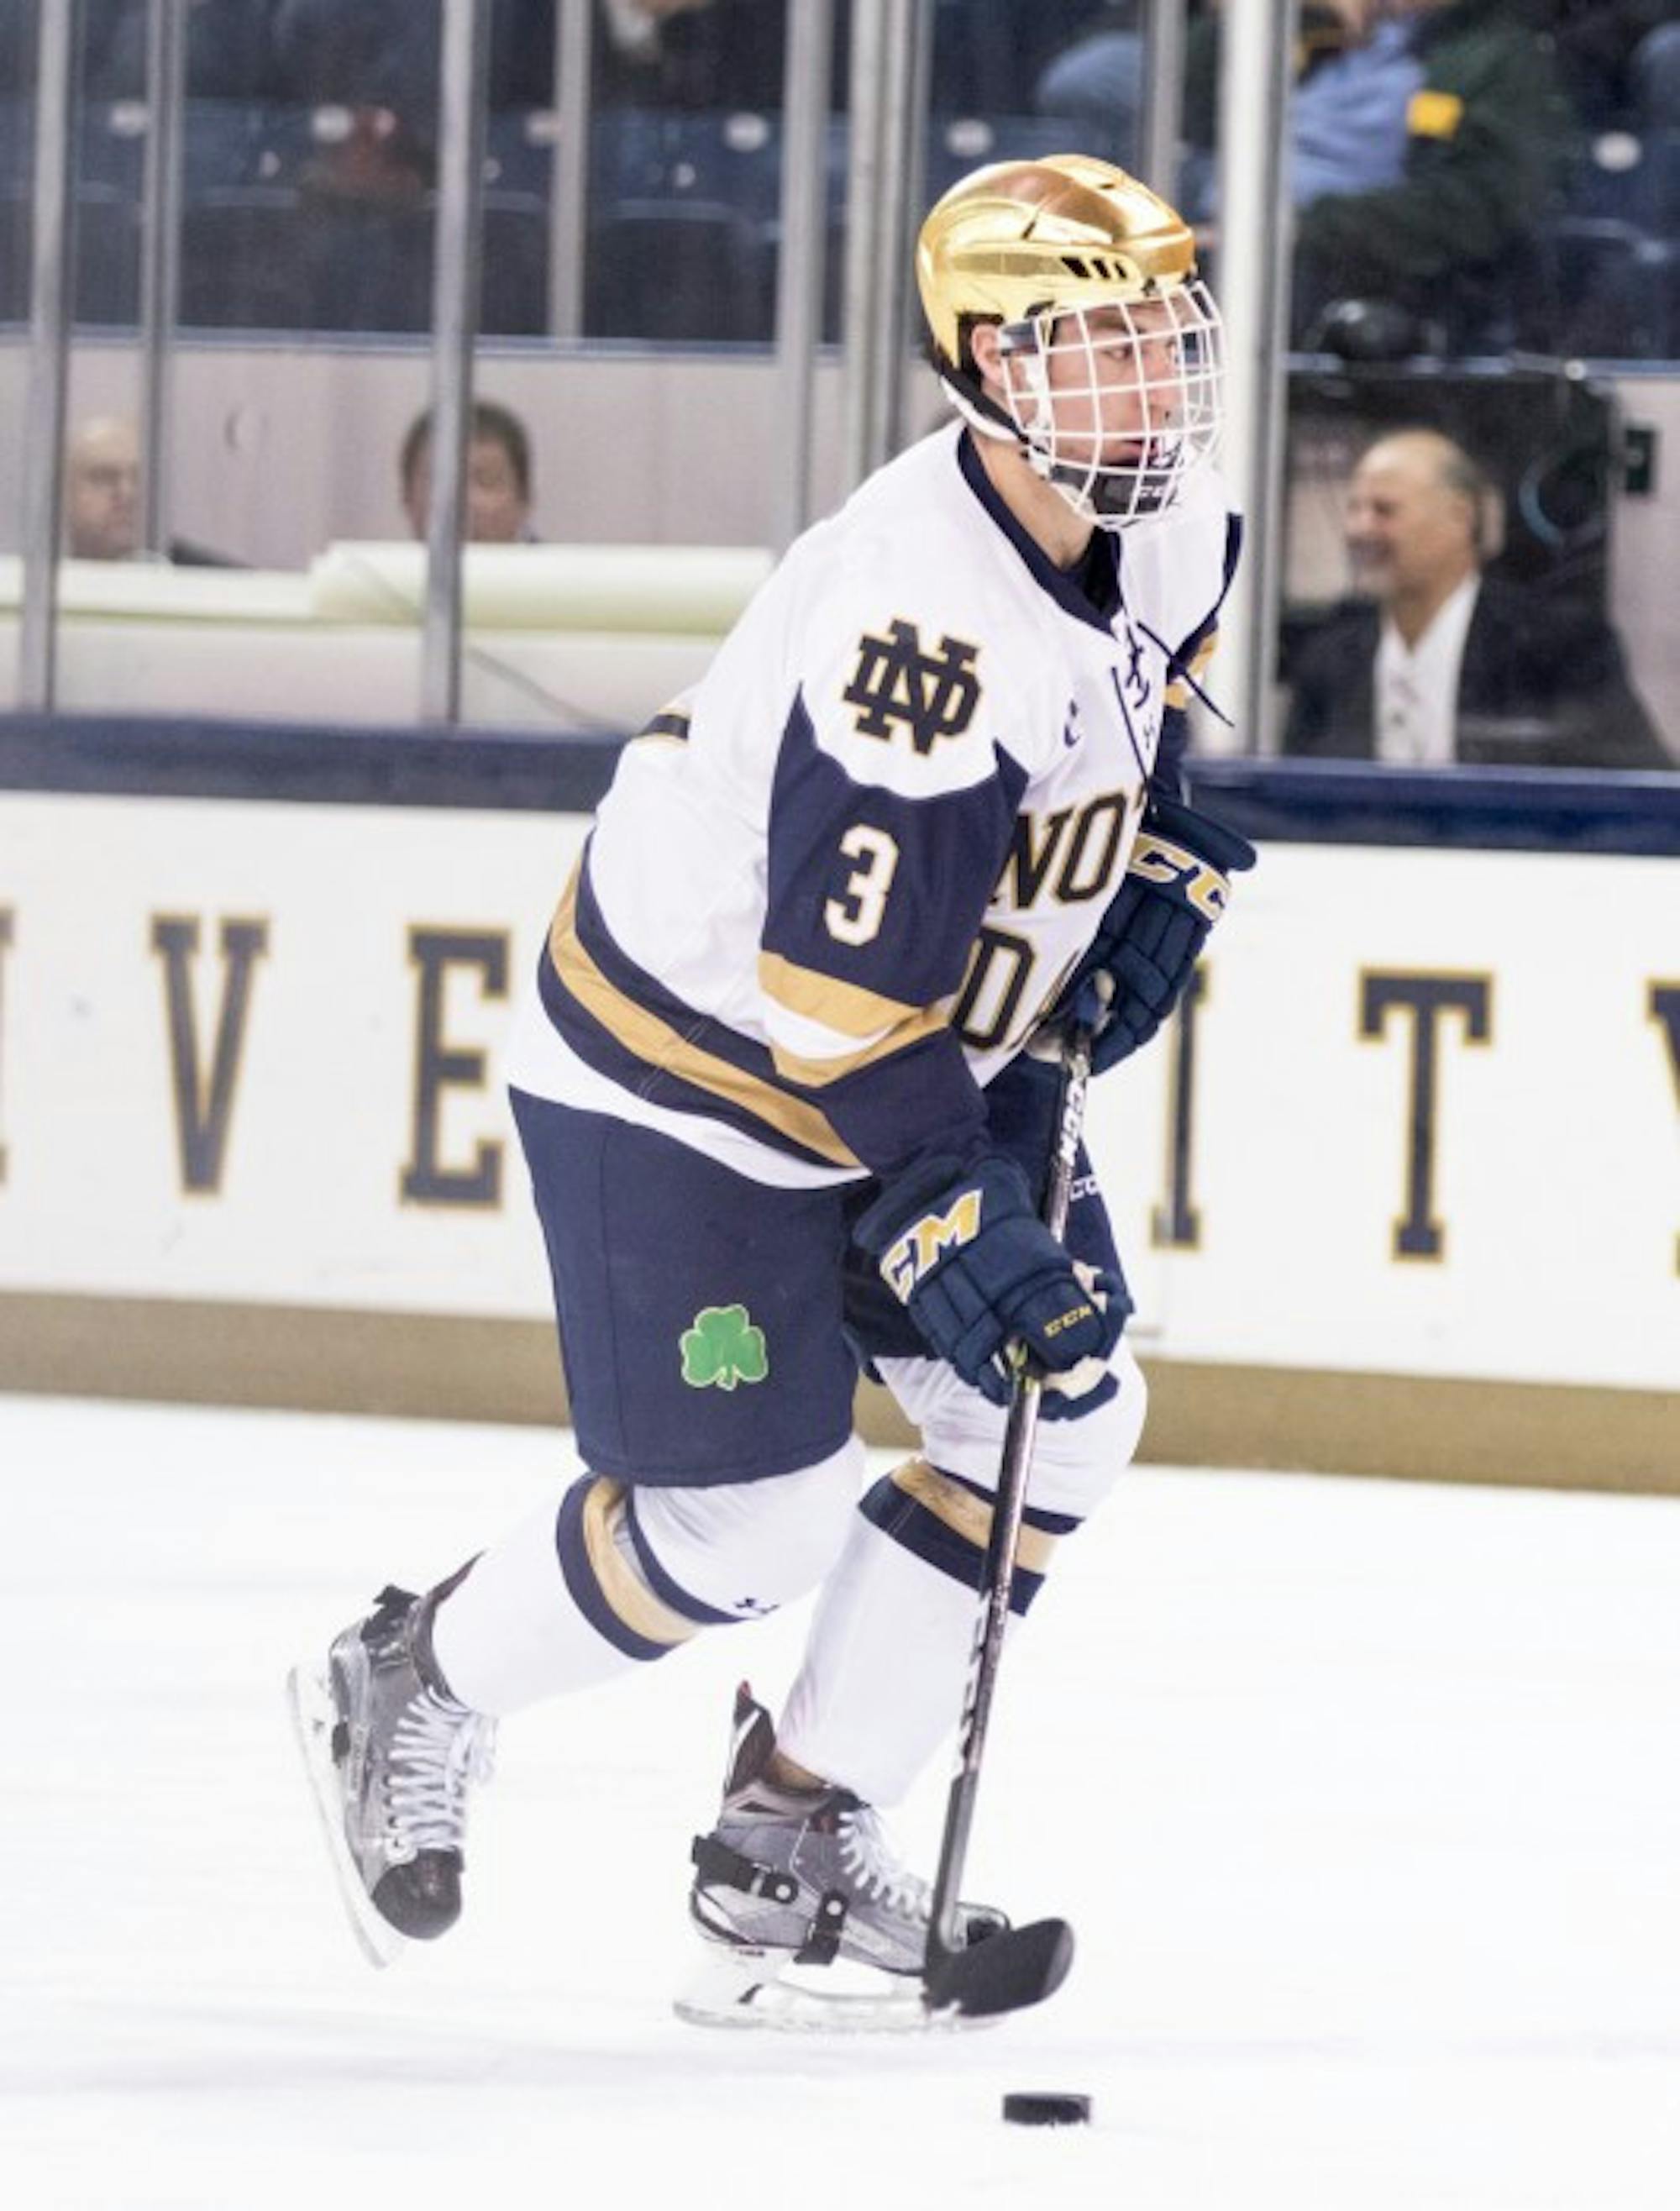 Irish junior defenseman Jordan Gross moves the puck up the Ice in Notre Dame's 4-2 loss to UConn on Oct. 27.